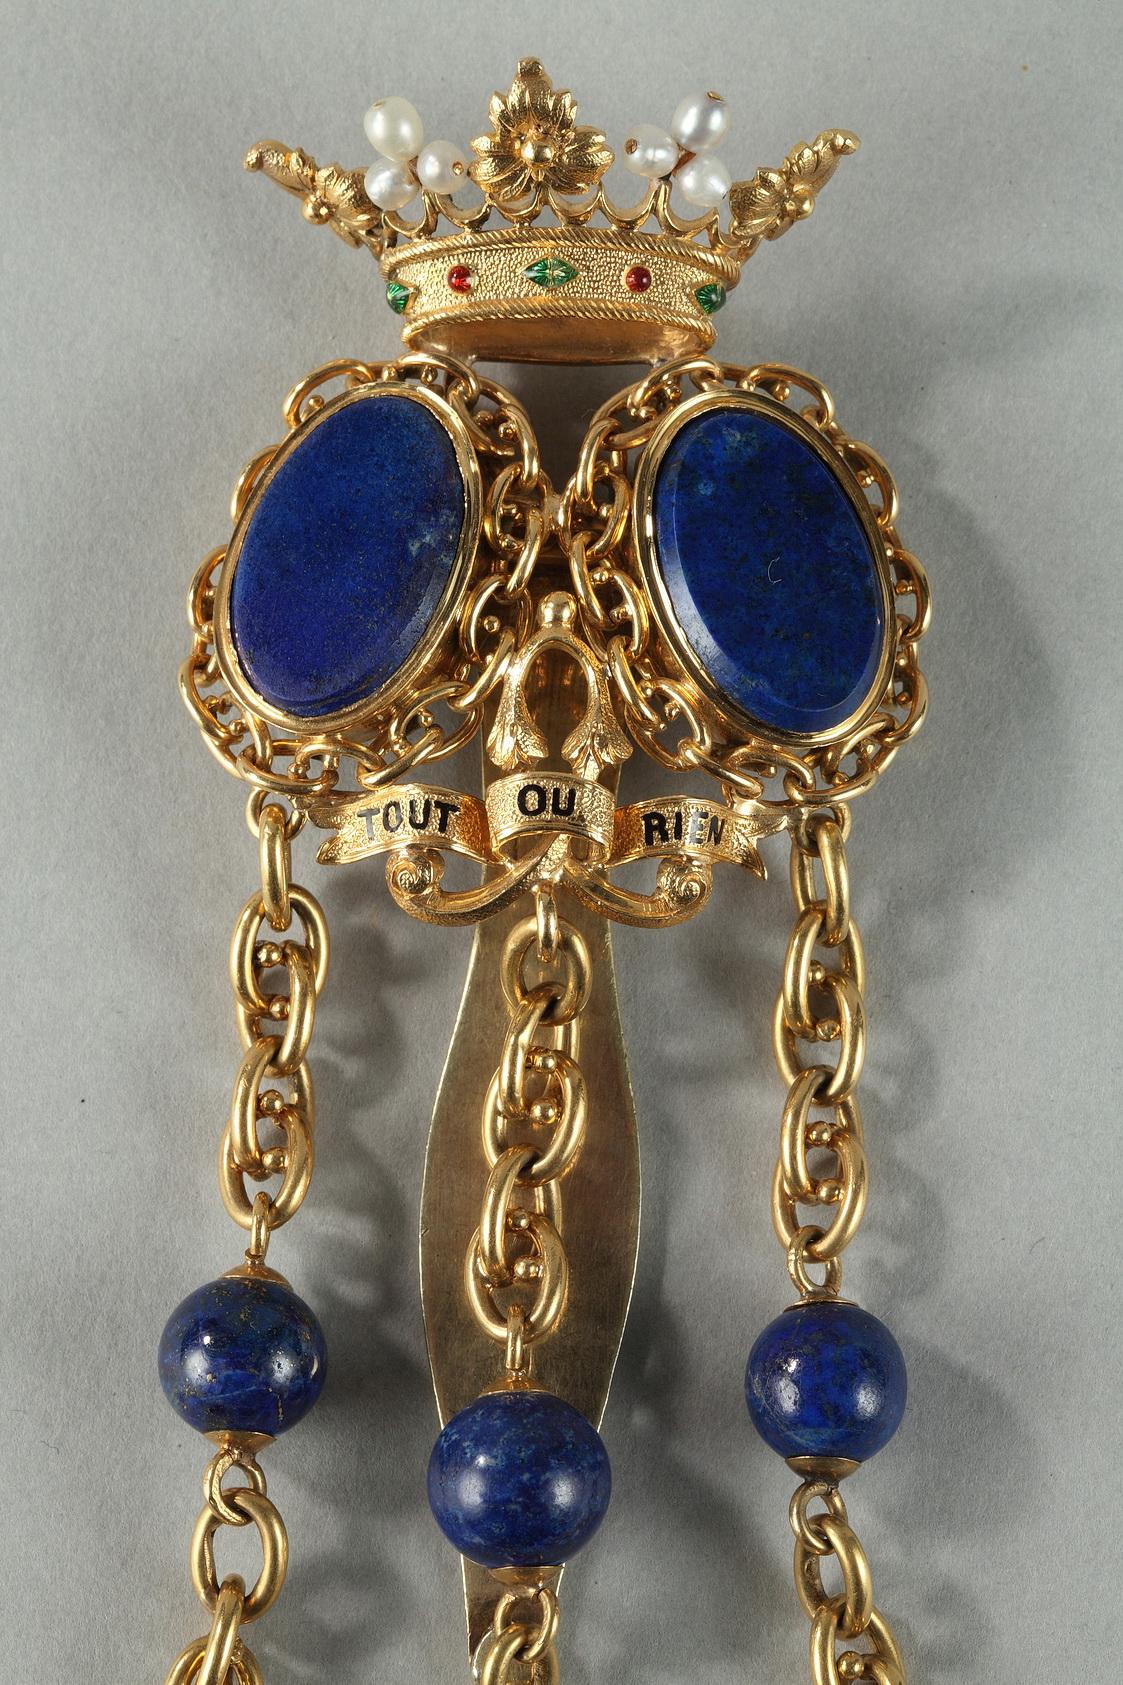 Gold chatelaine with belt hook behind. Two smooth lapis lazuli blazons are set in think, chain-link rings and topped with a crown embellished with pearls and inlaid with small green and red stones. Below the lapis lazuli blazons is a black enamel